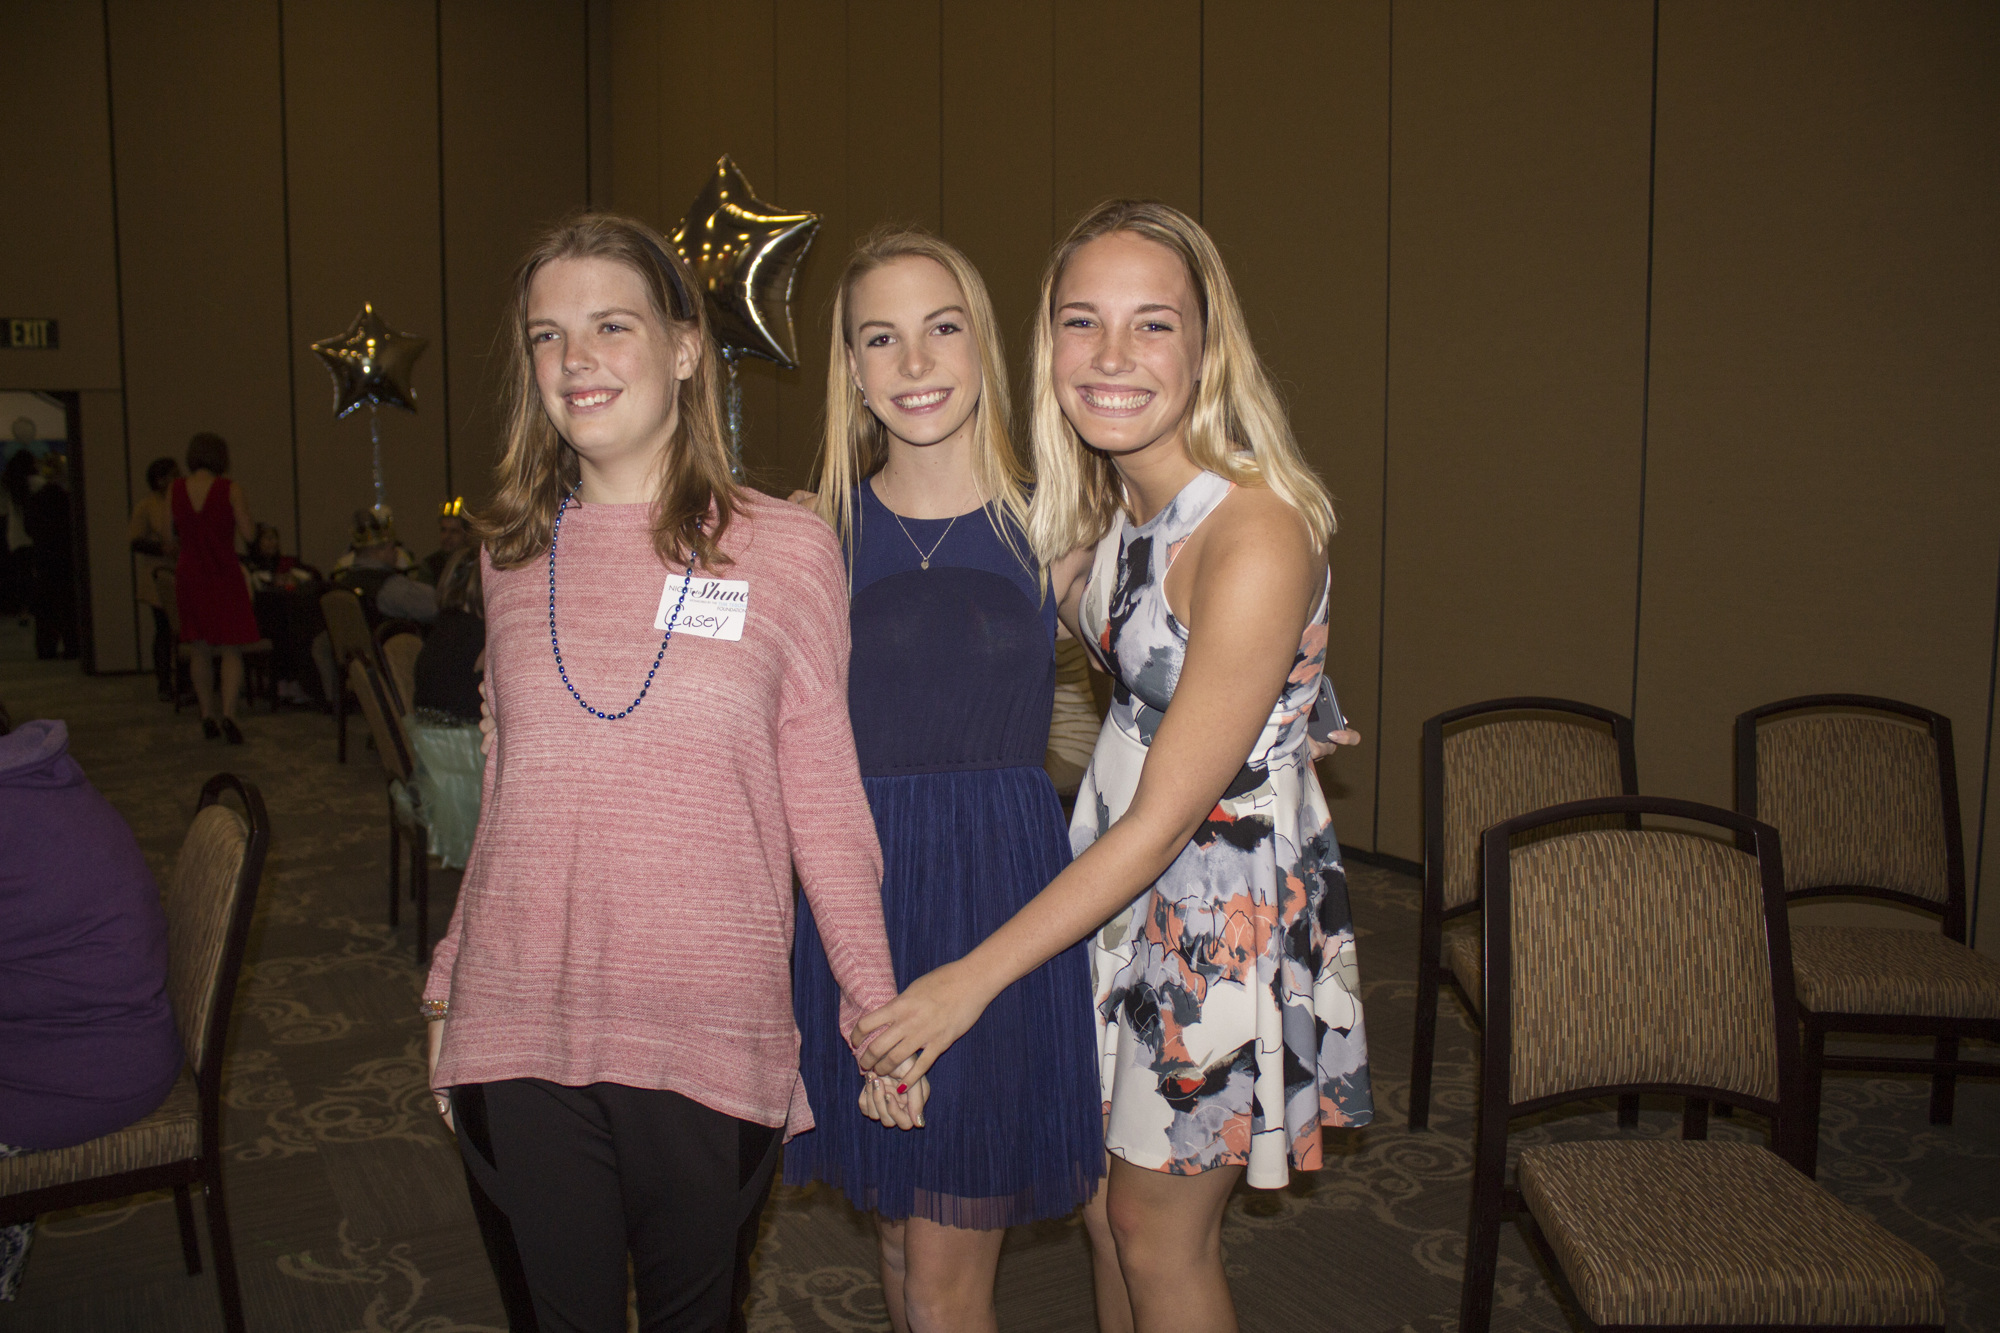 Casey Brock, Mandy Brock, and their older sister, Lindsay Brock, who came down from the University of Florida to be with her sisters at Night to Shine.